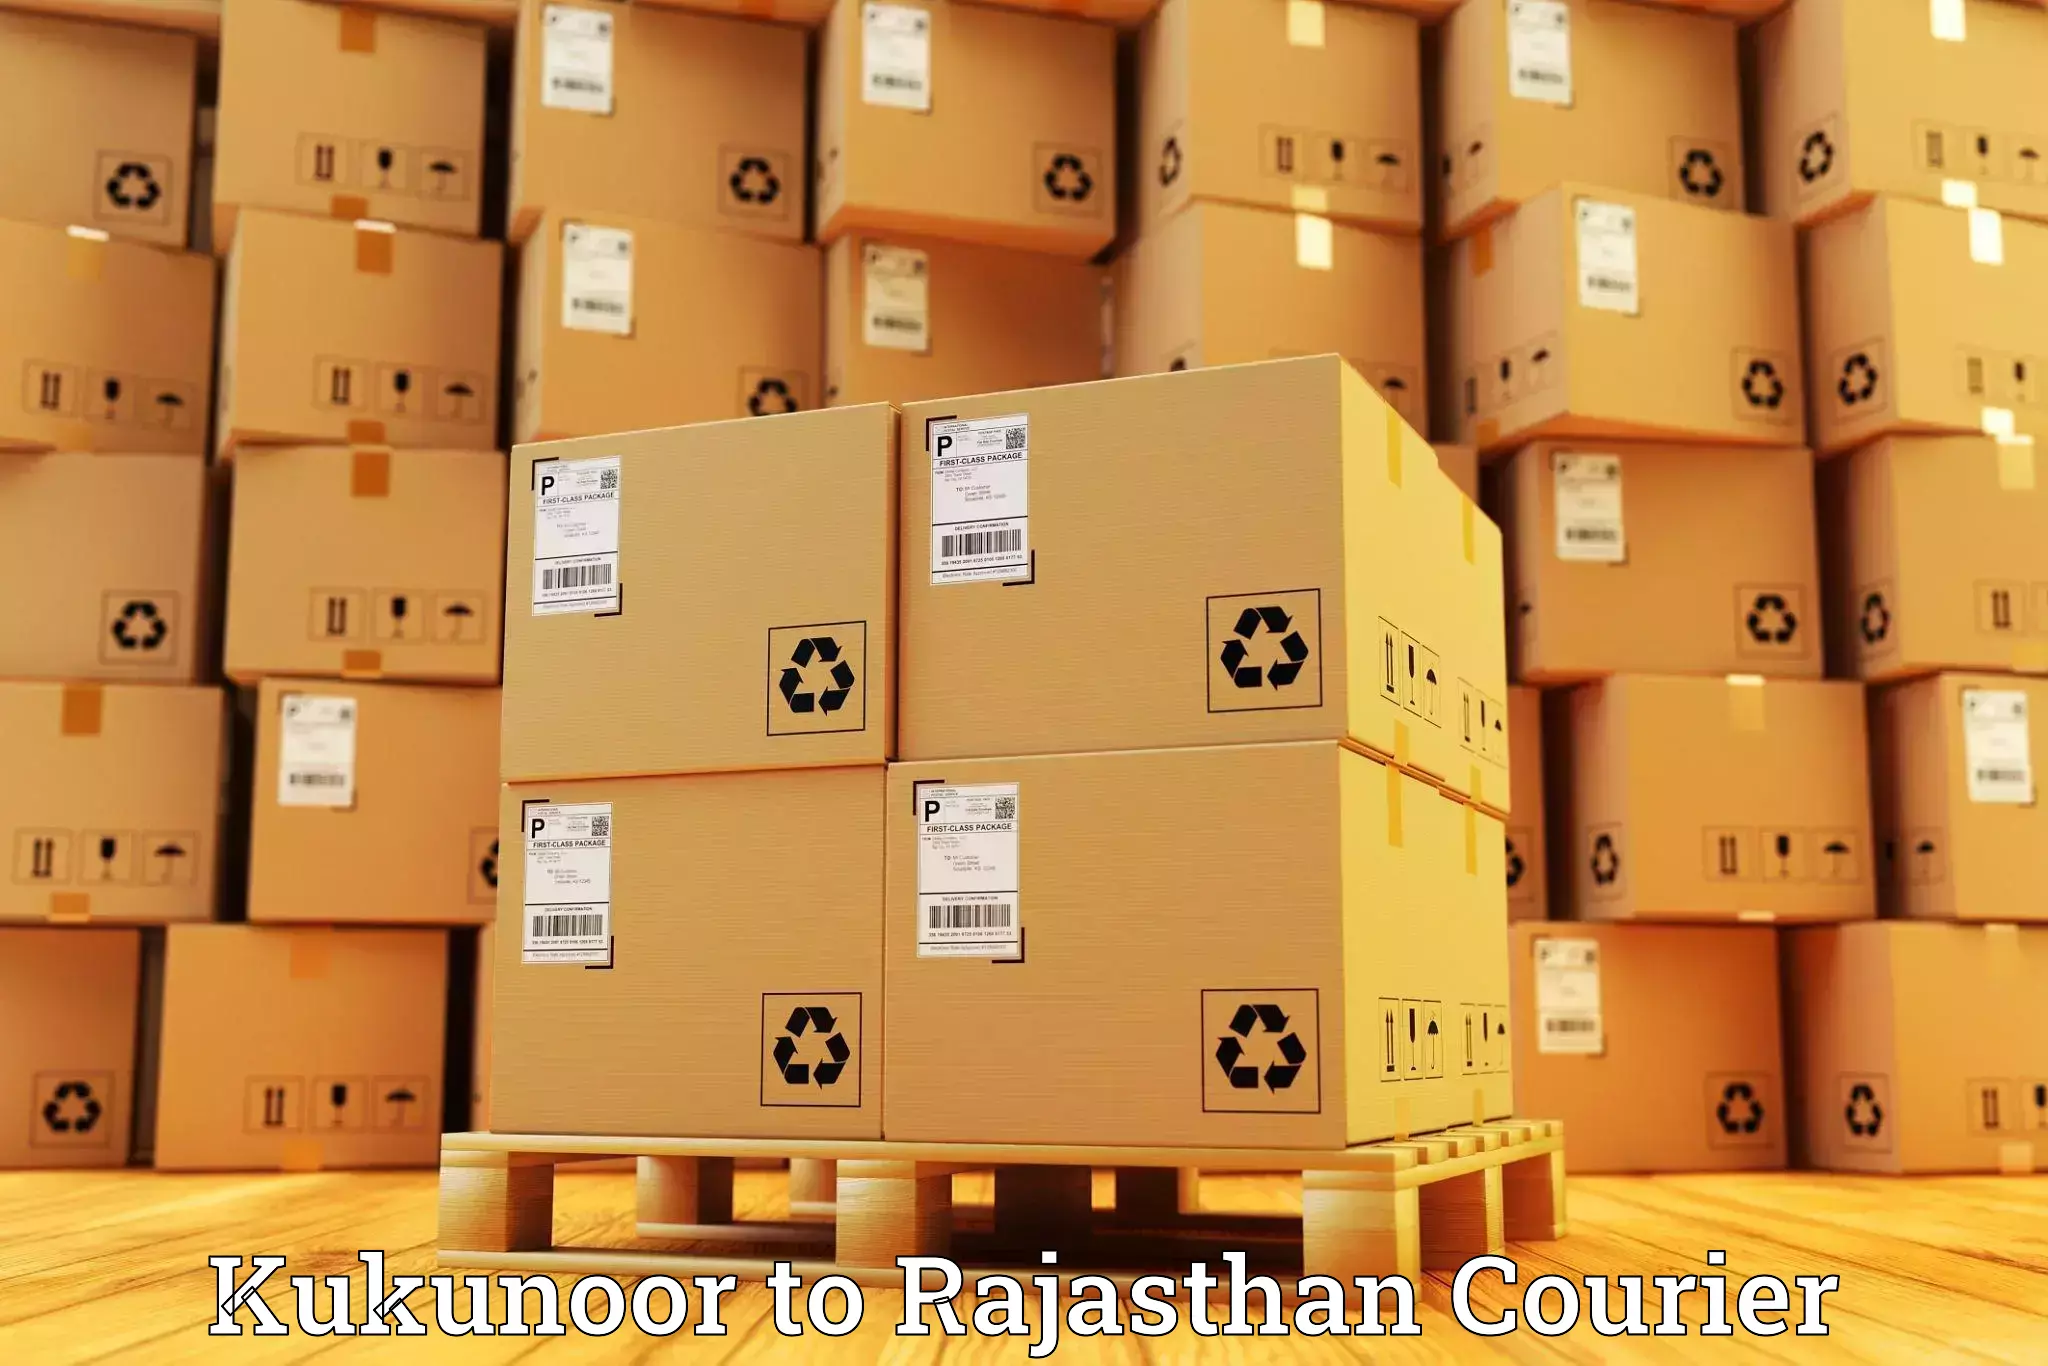 Global courier networks Kukunoor to Yeswanthapur